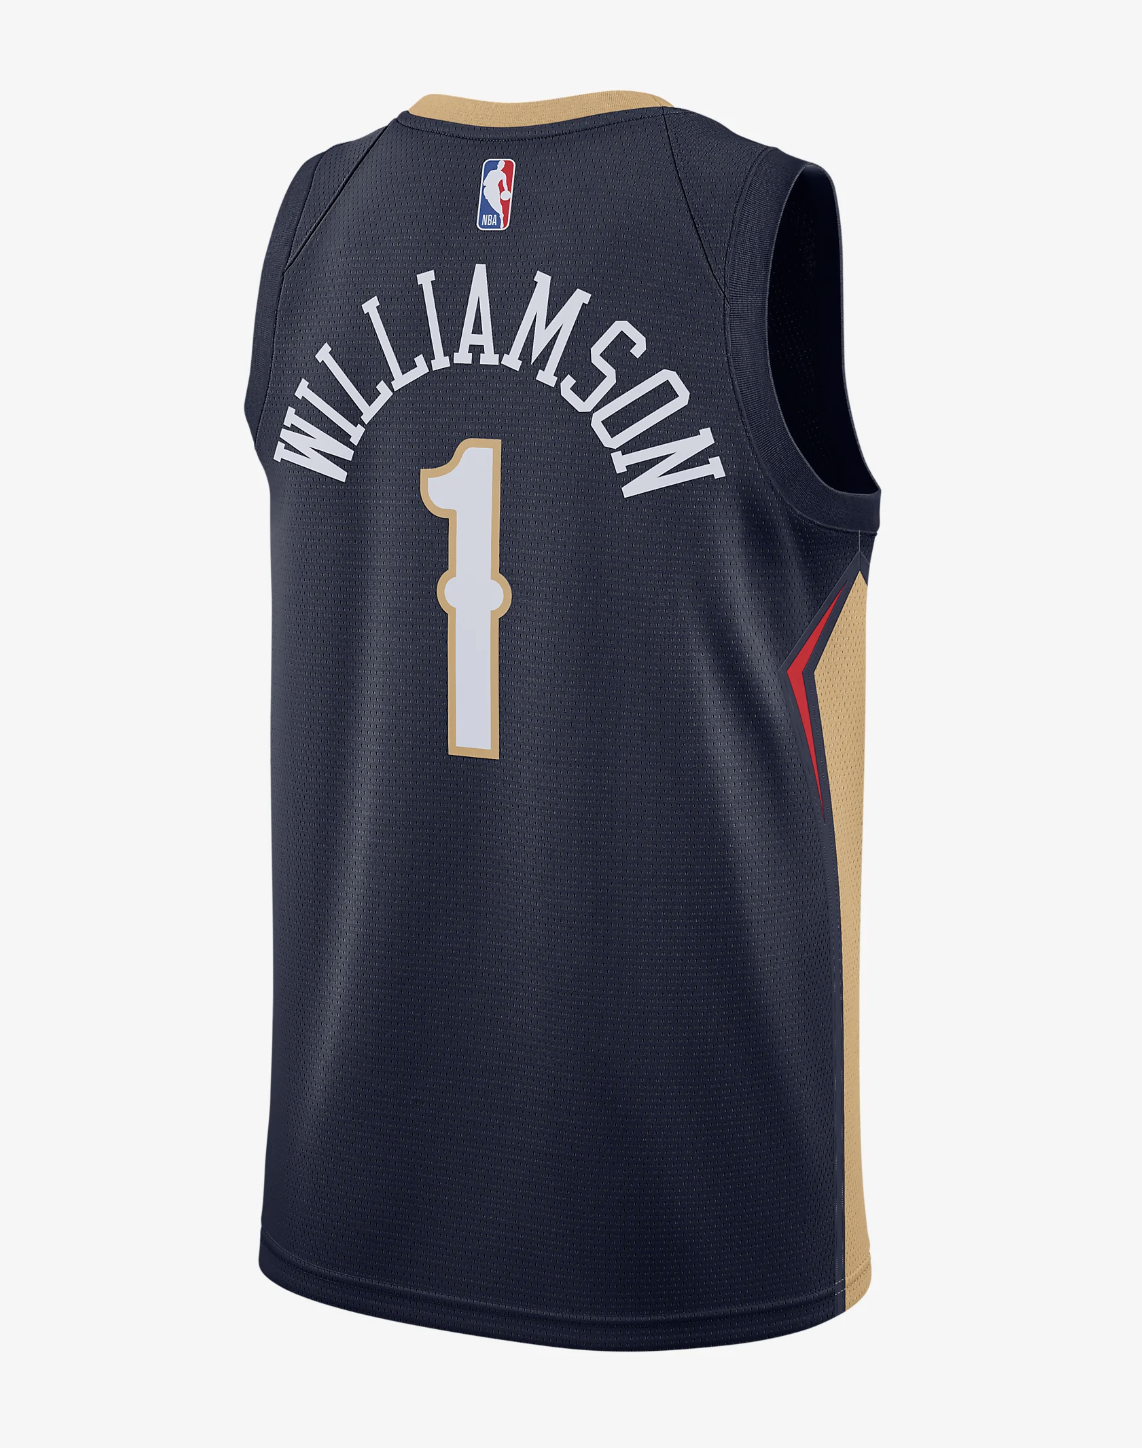 Now Available: Nike NBA New Orleans 